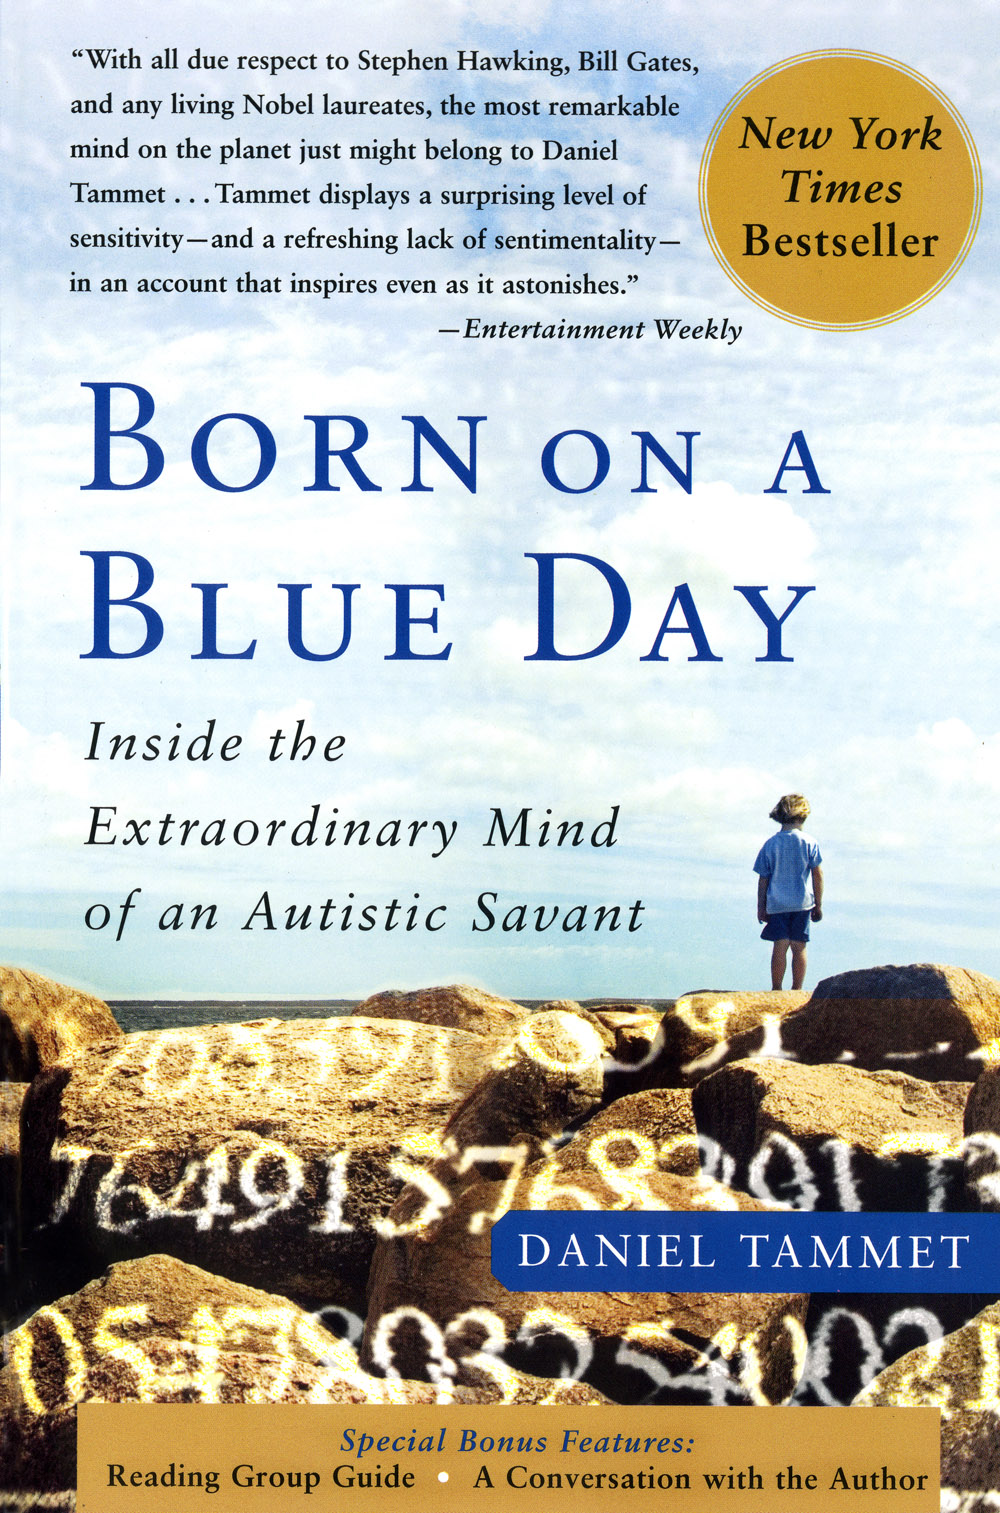 Born on a blue day book report